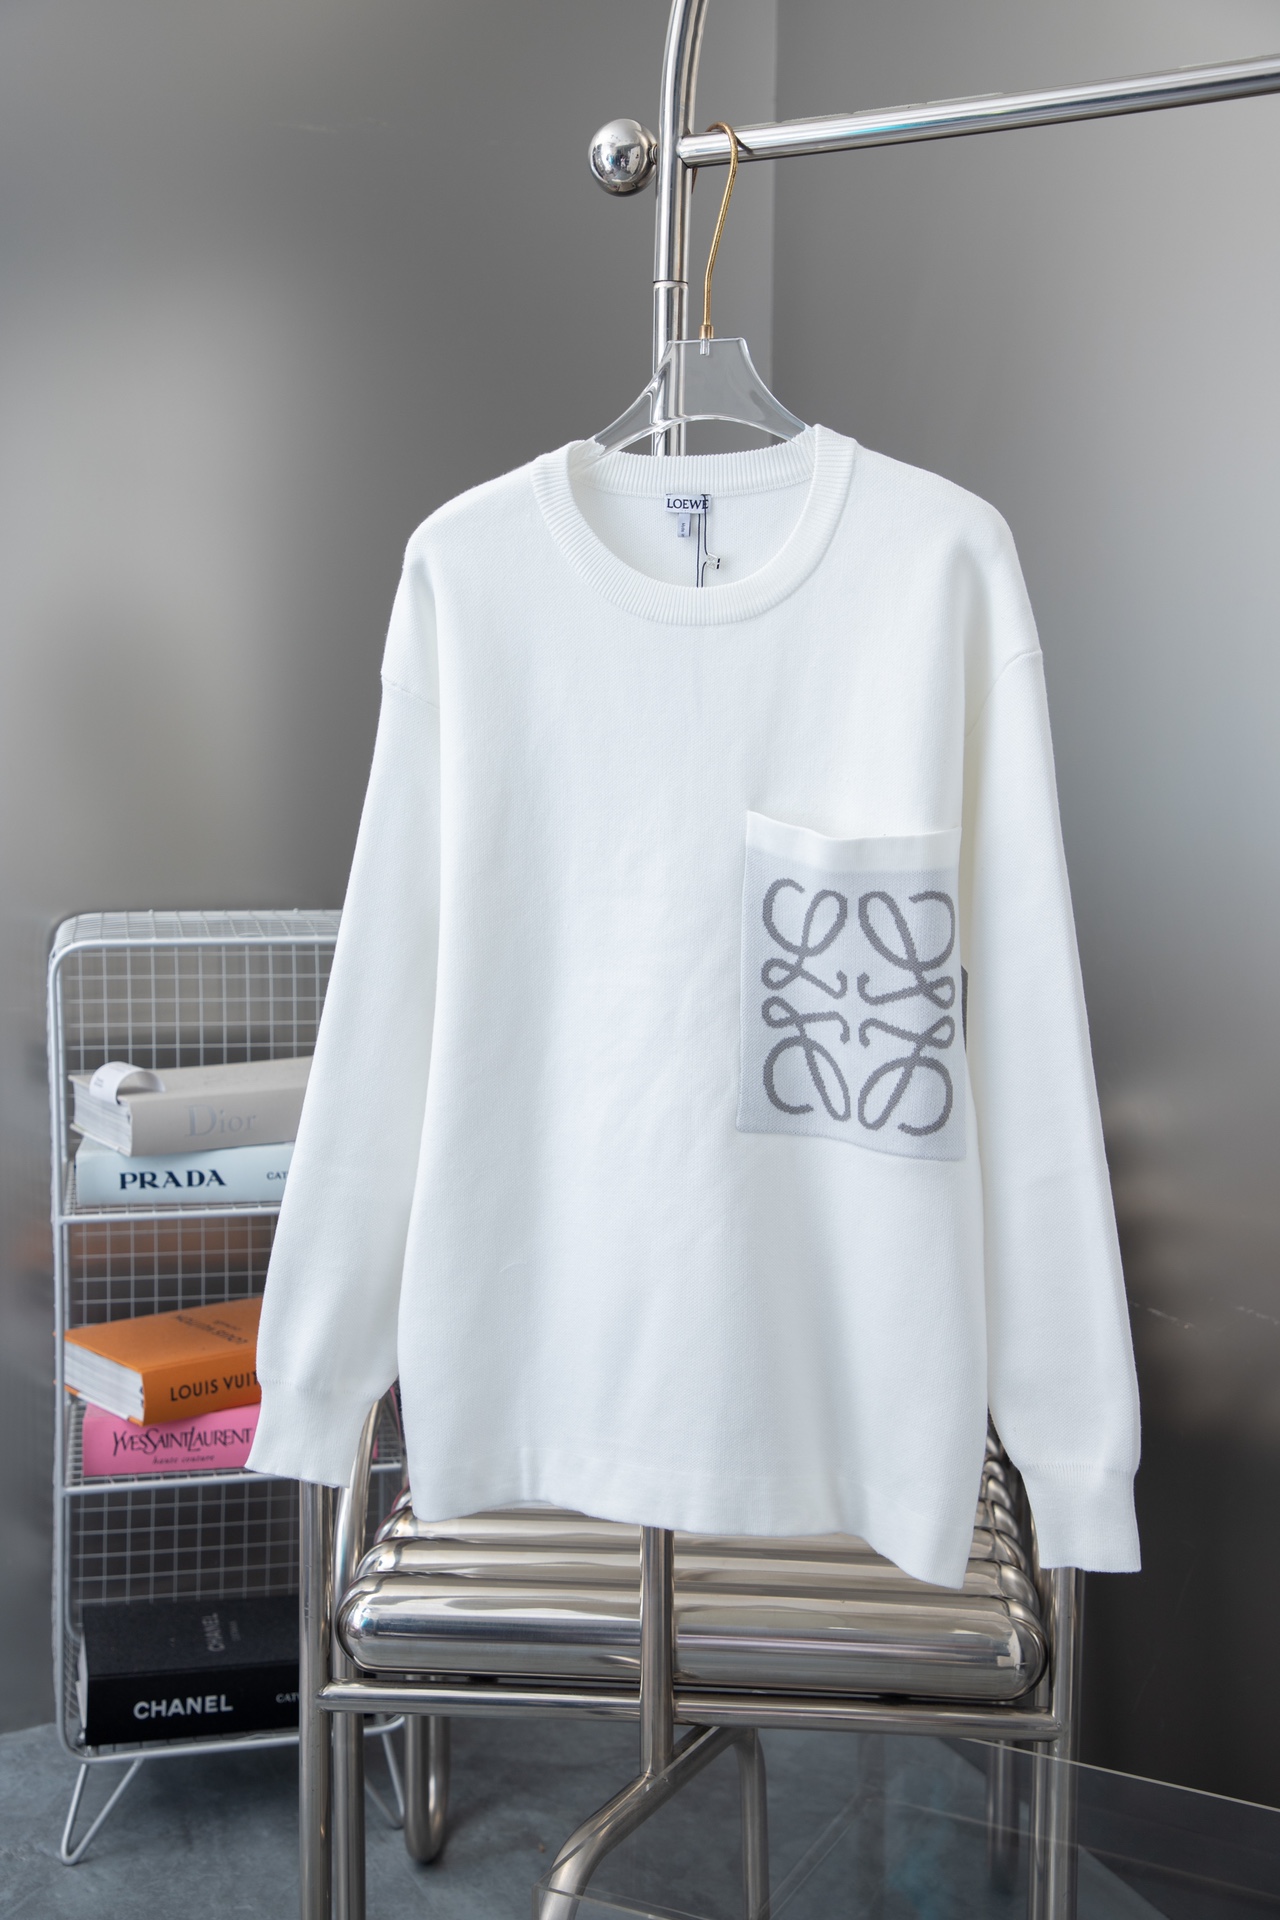 Loewe Clothing Sweatshirts Weave Unisex Combed Cotton Fall Collection